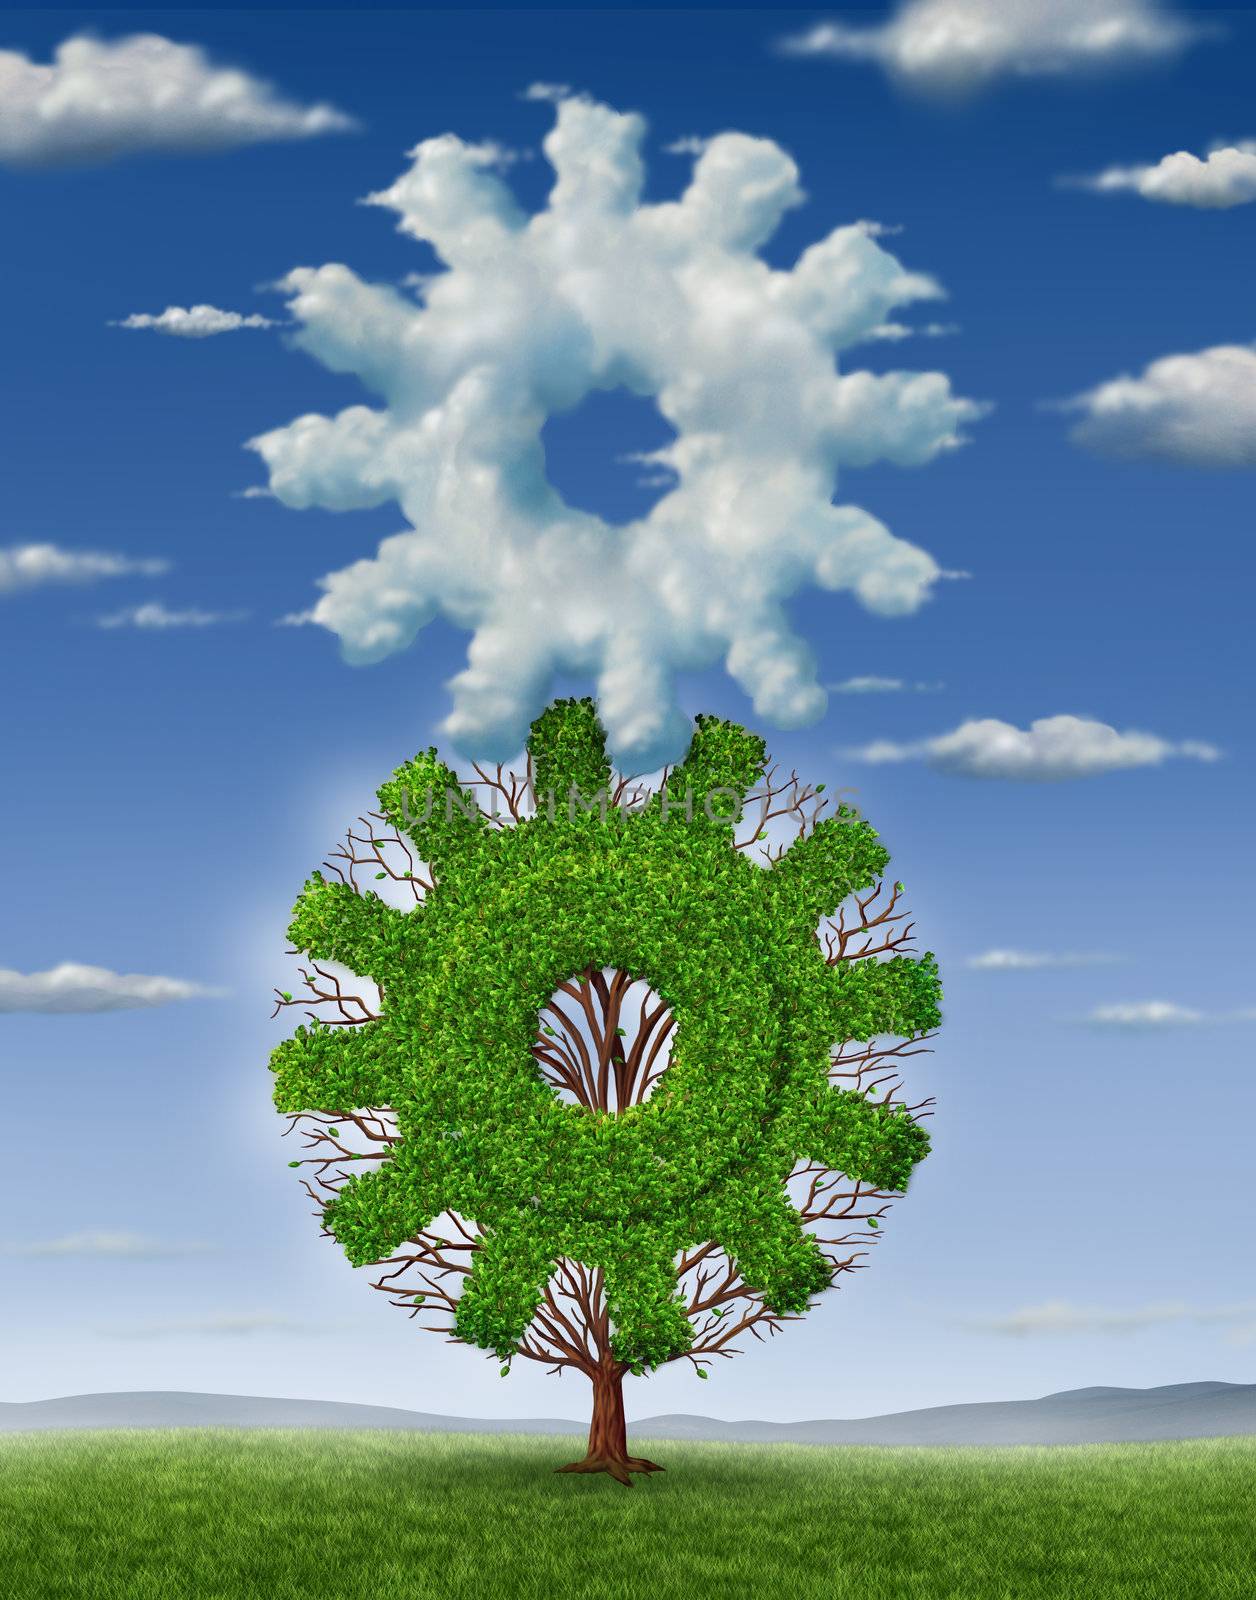 Cloud industry technology and business concept with a clouds in the shape of a gear and a growing tree shaped as a cog coming together connected as a team to work as a partnership for success in information management.